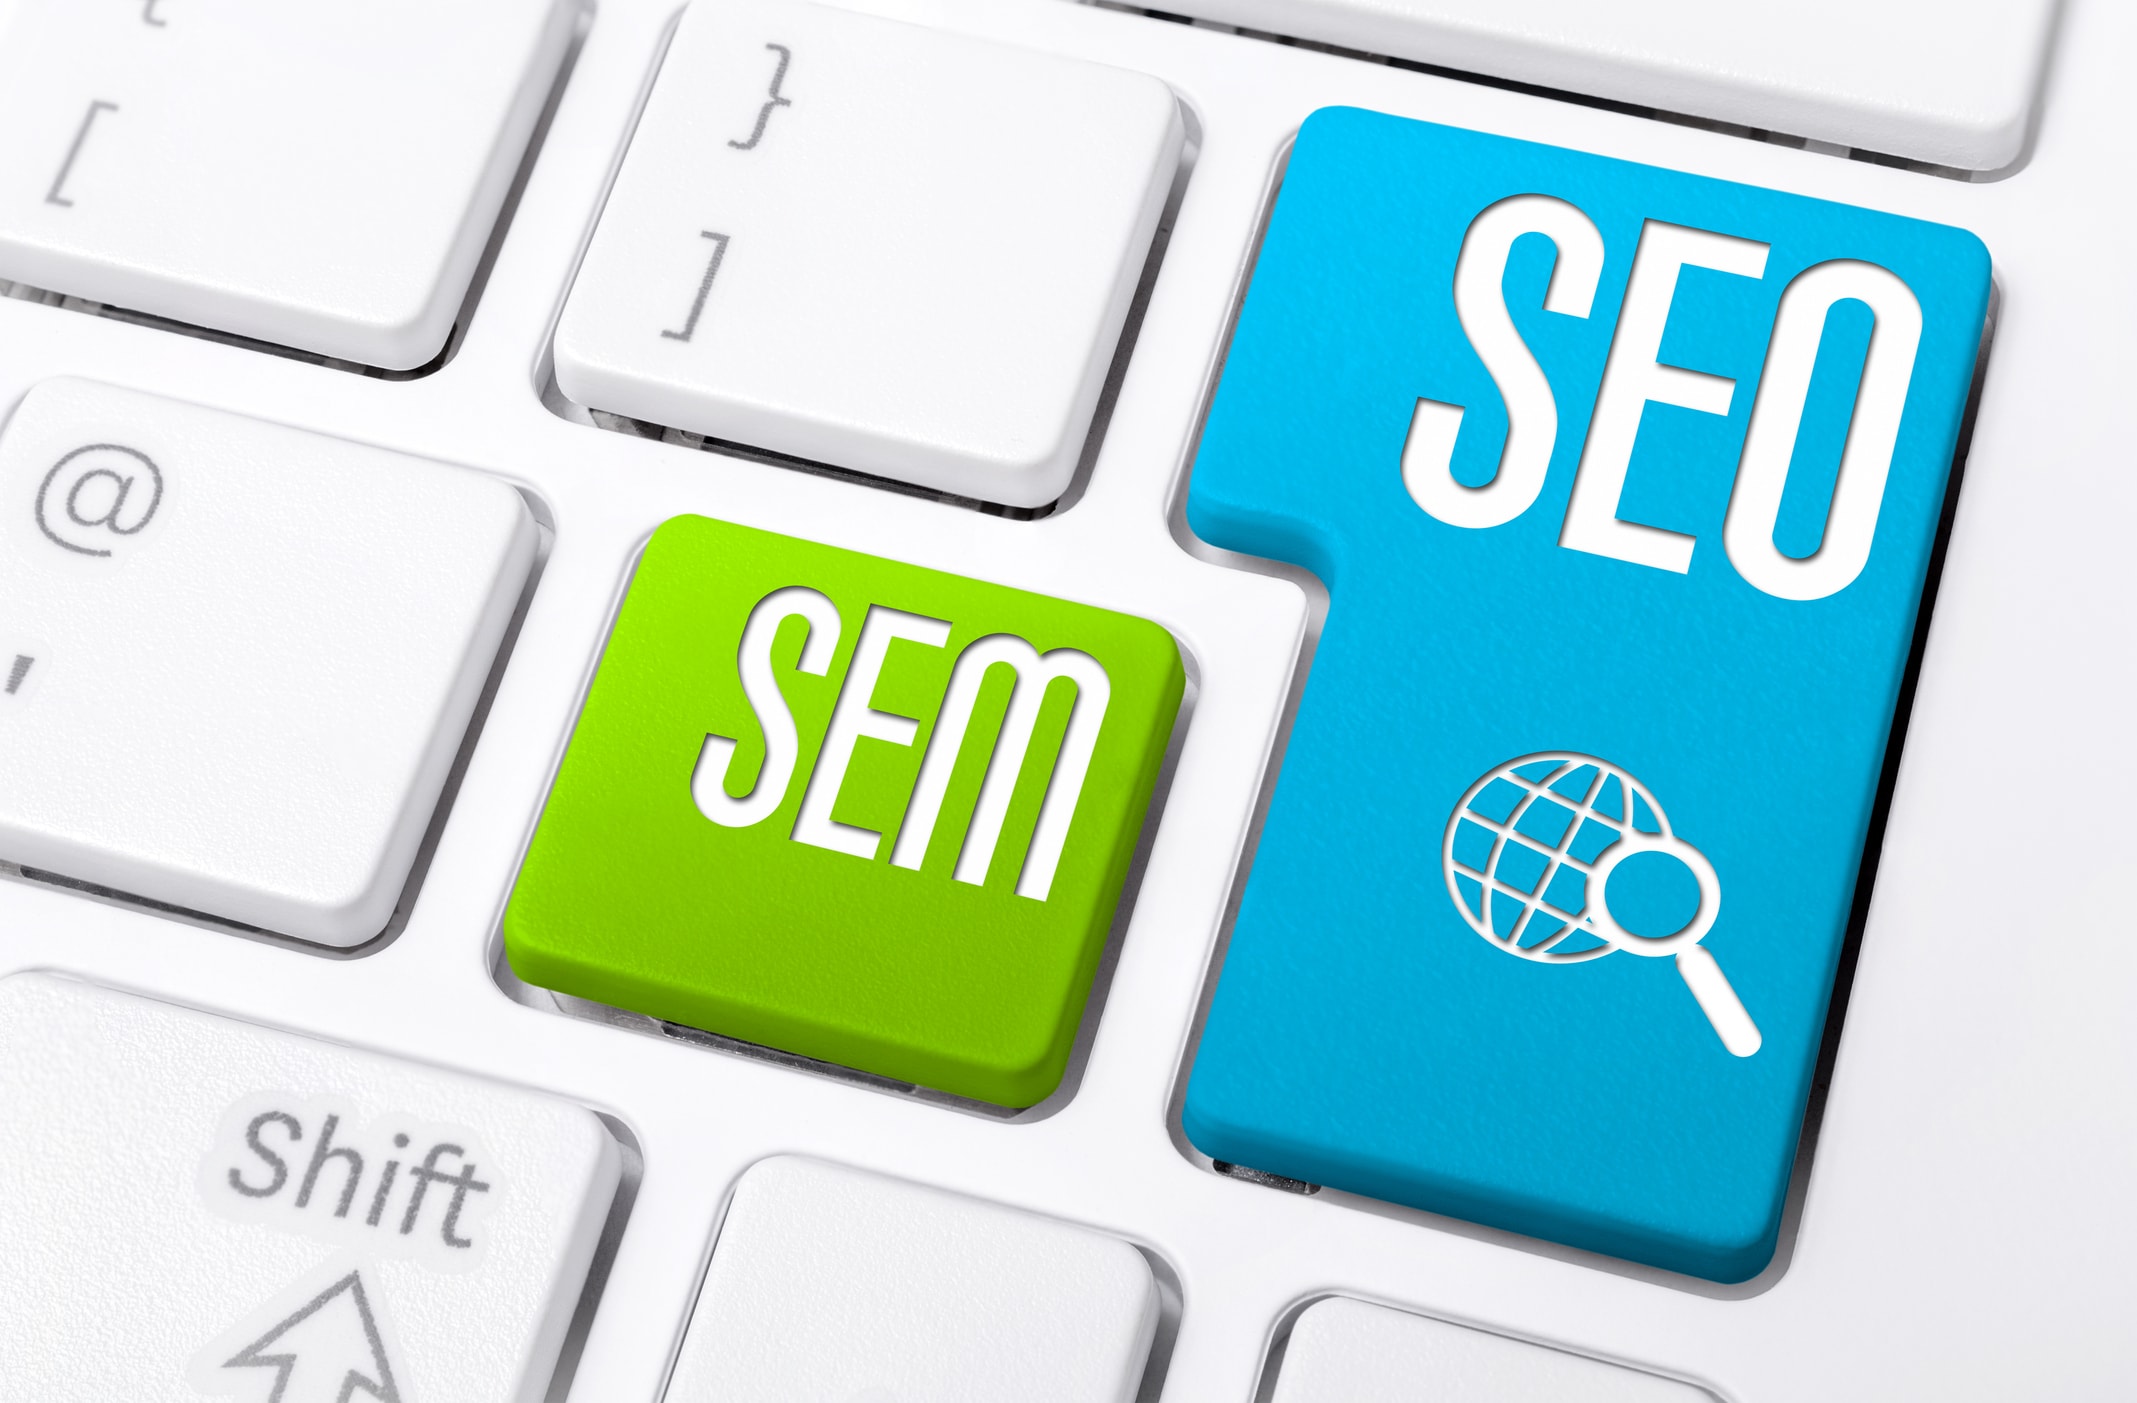 What is Search Engine Marketing (SEM)